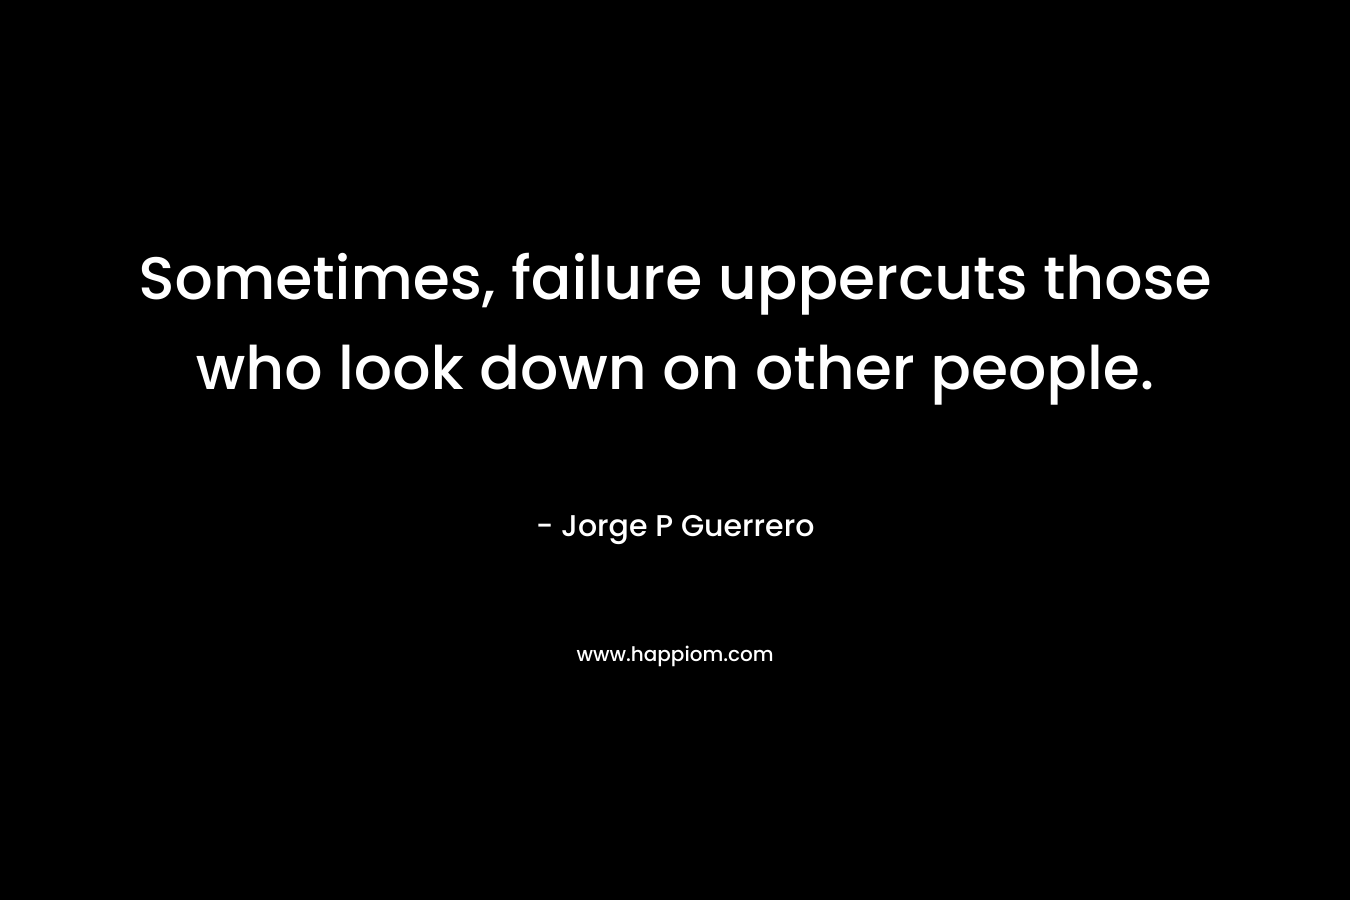 Sometimes, failure uppercuts those who look down on other people.